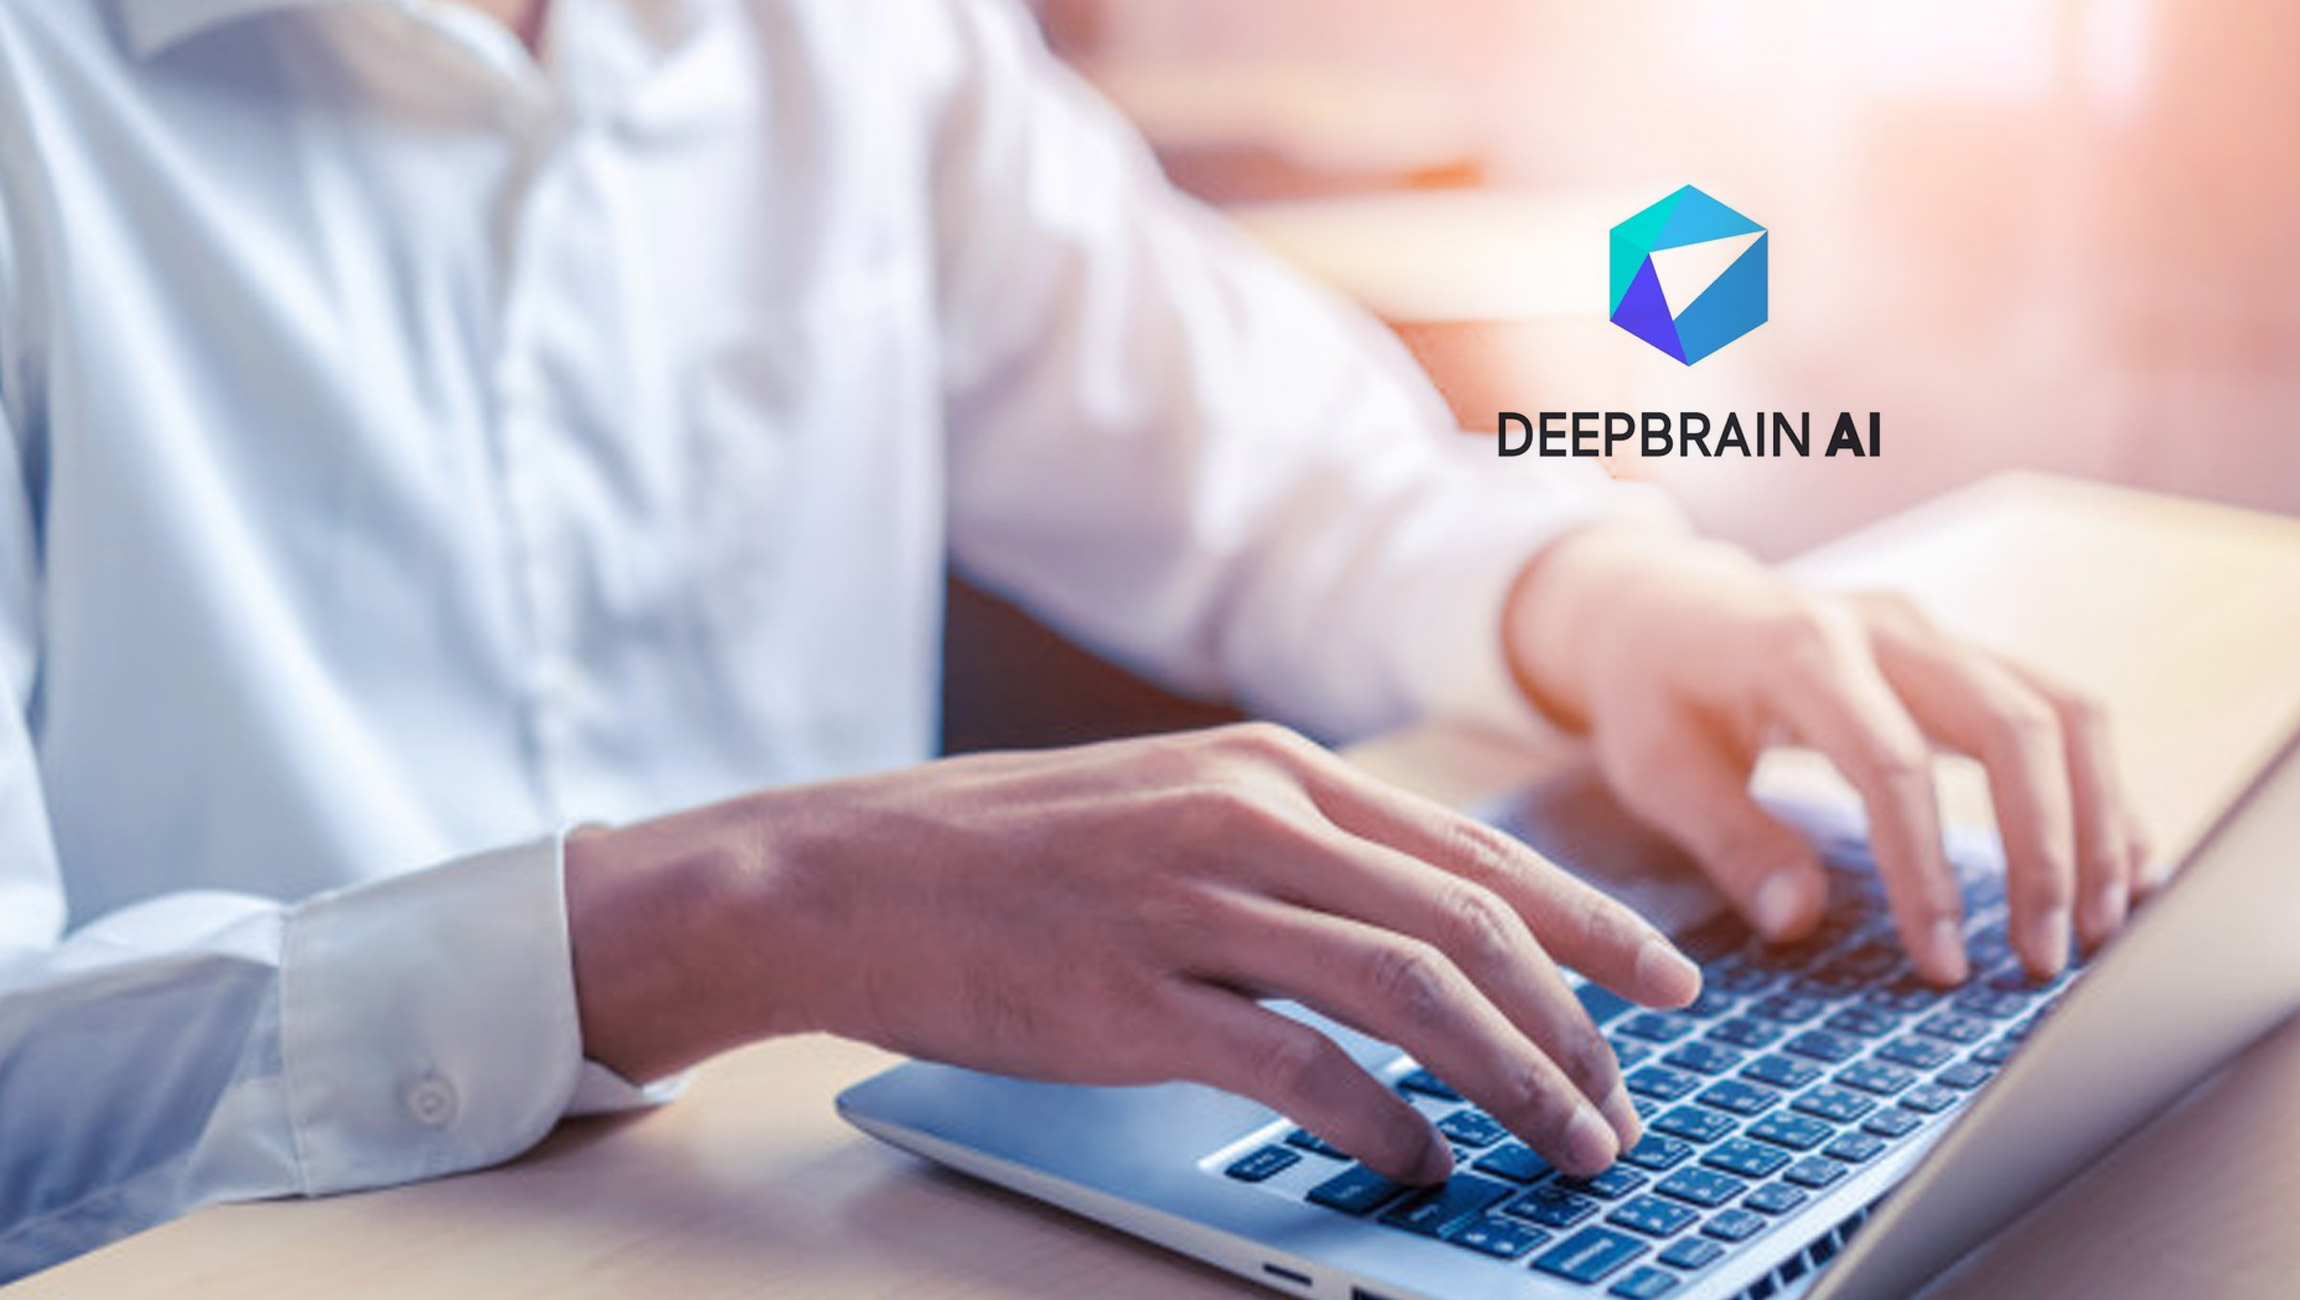 DeepBrain AI, Newly Revealing Its AI Kiosks, Was Spotlighted By The World Stage At CES And Continues the Journey by Exhibiting At NRF 2022